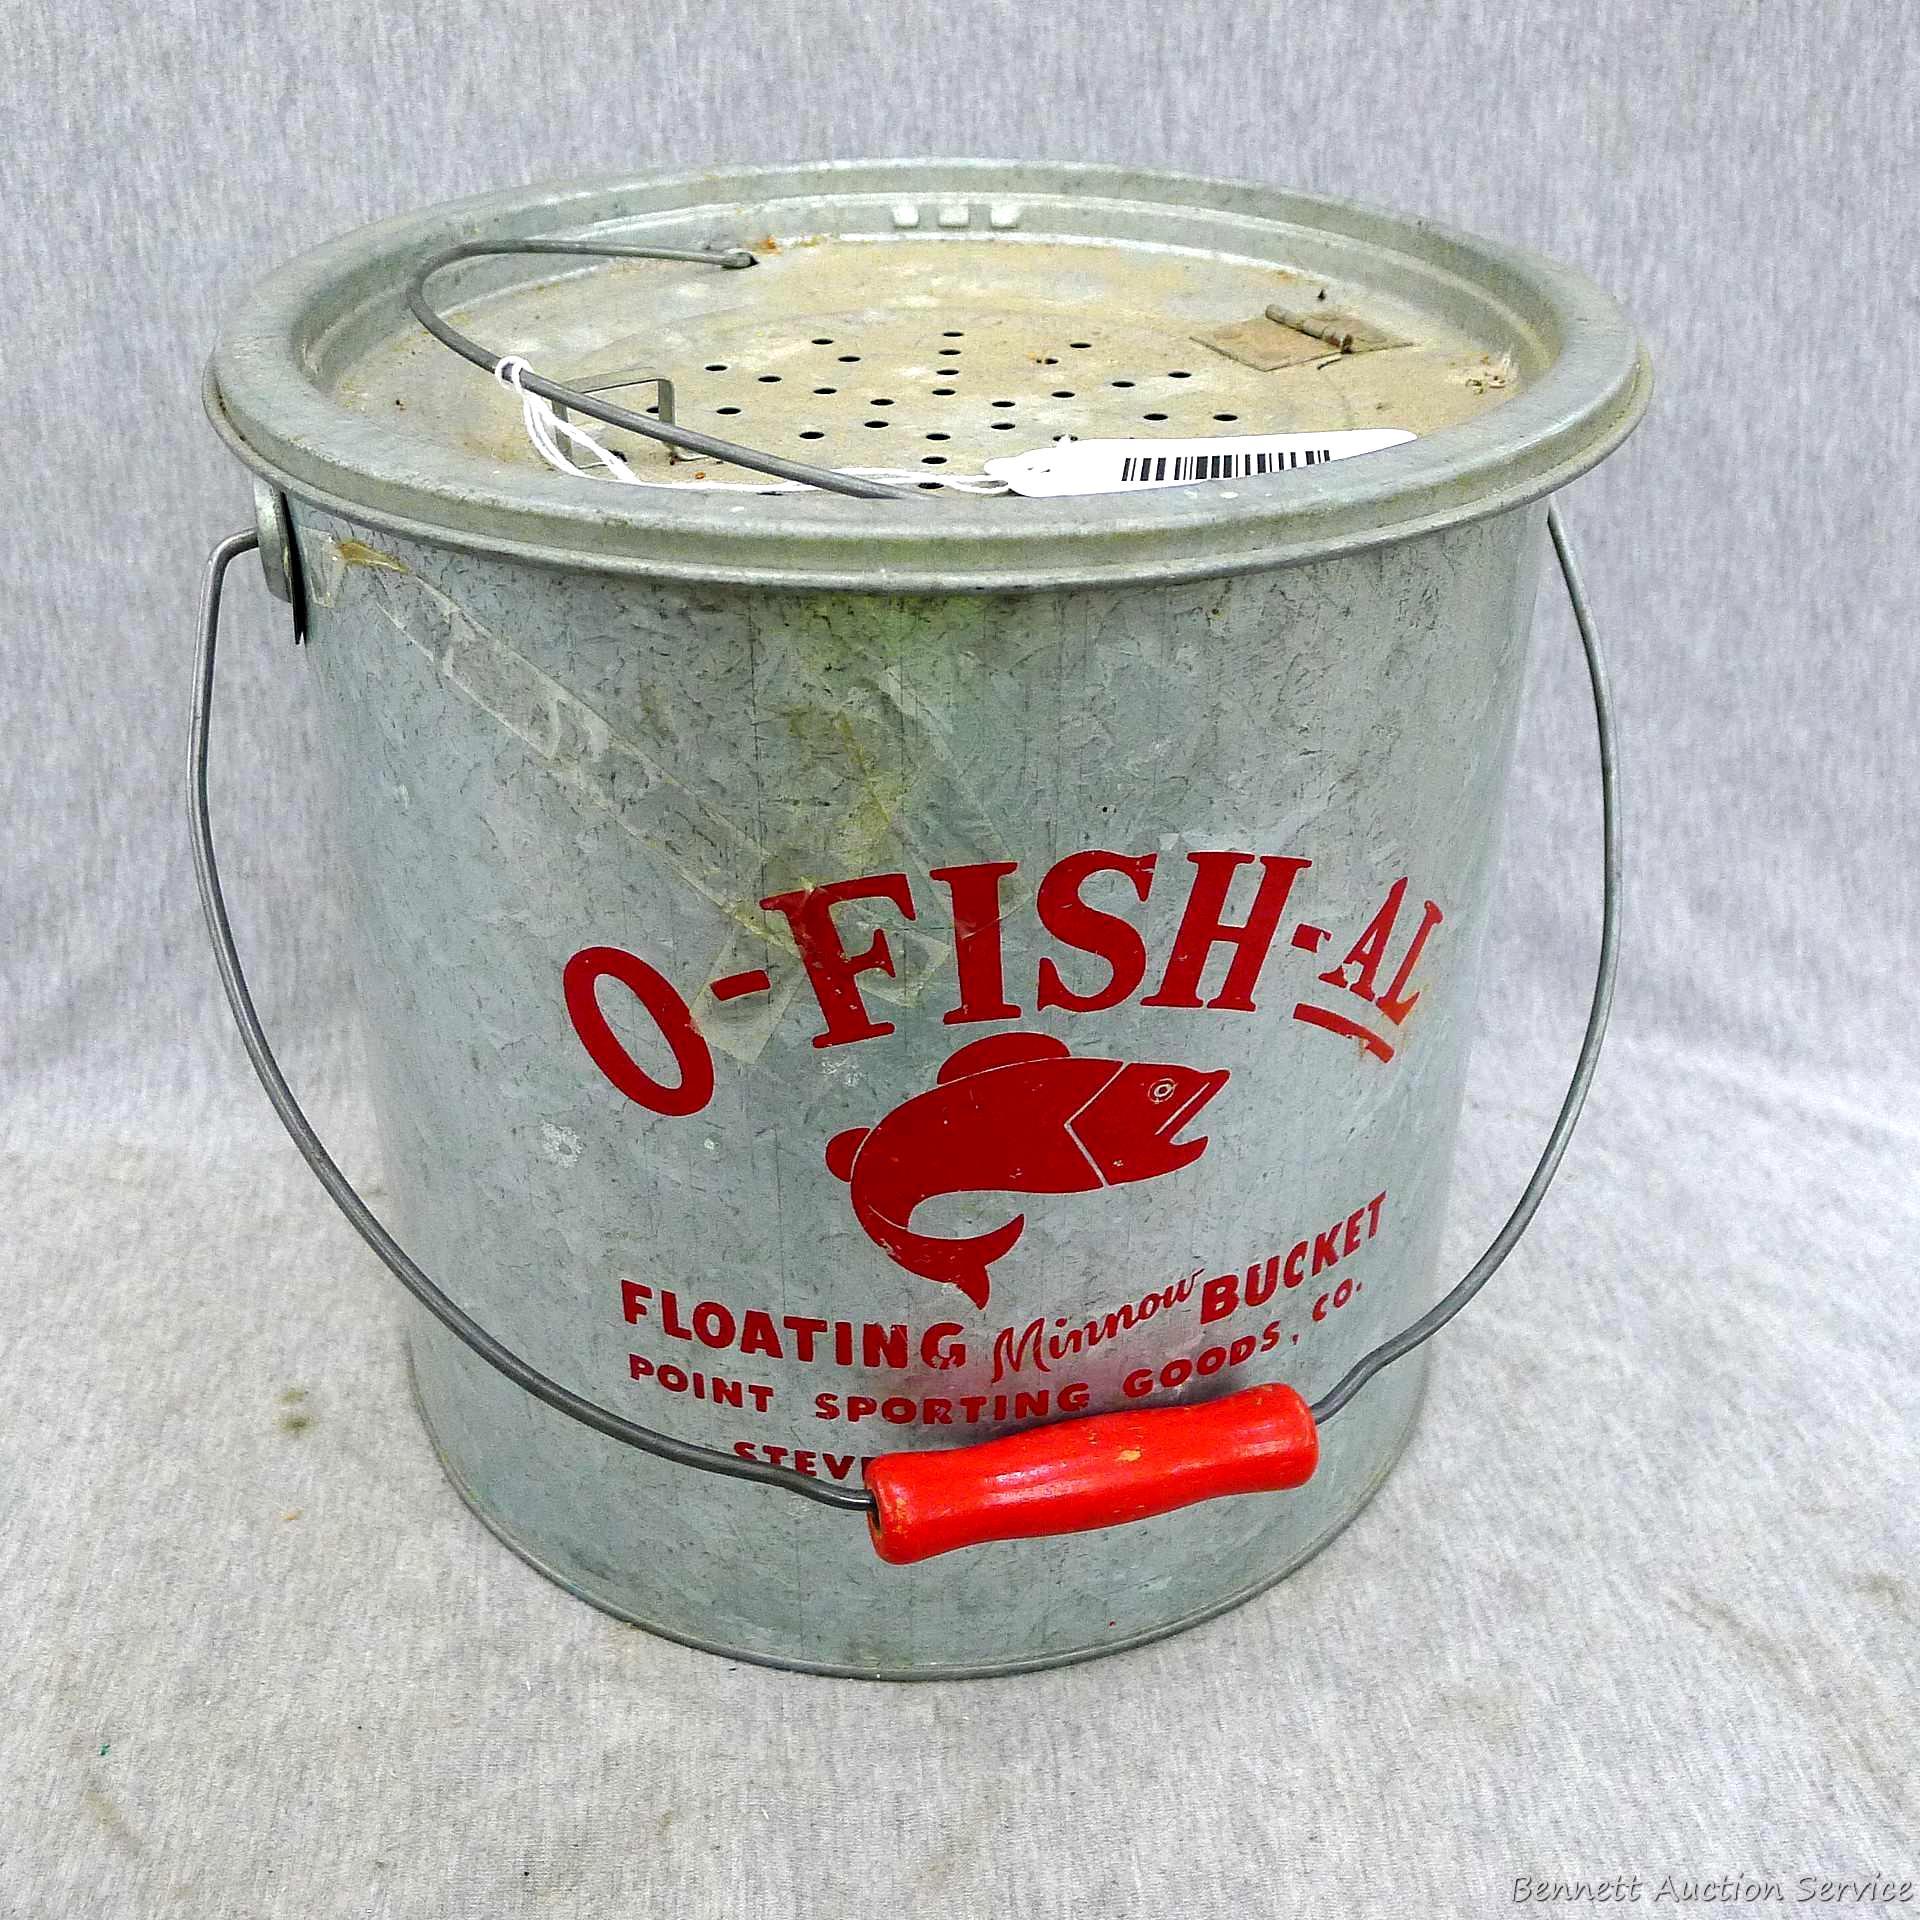 O-Fish-Al Floating Minnow Bucket, made by Point